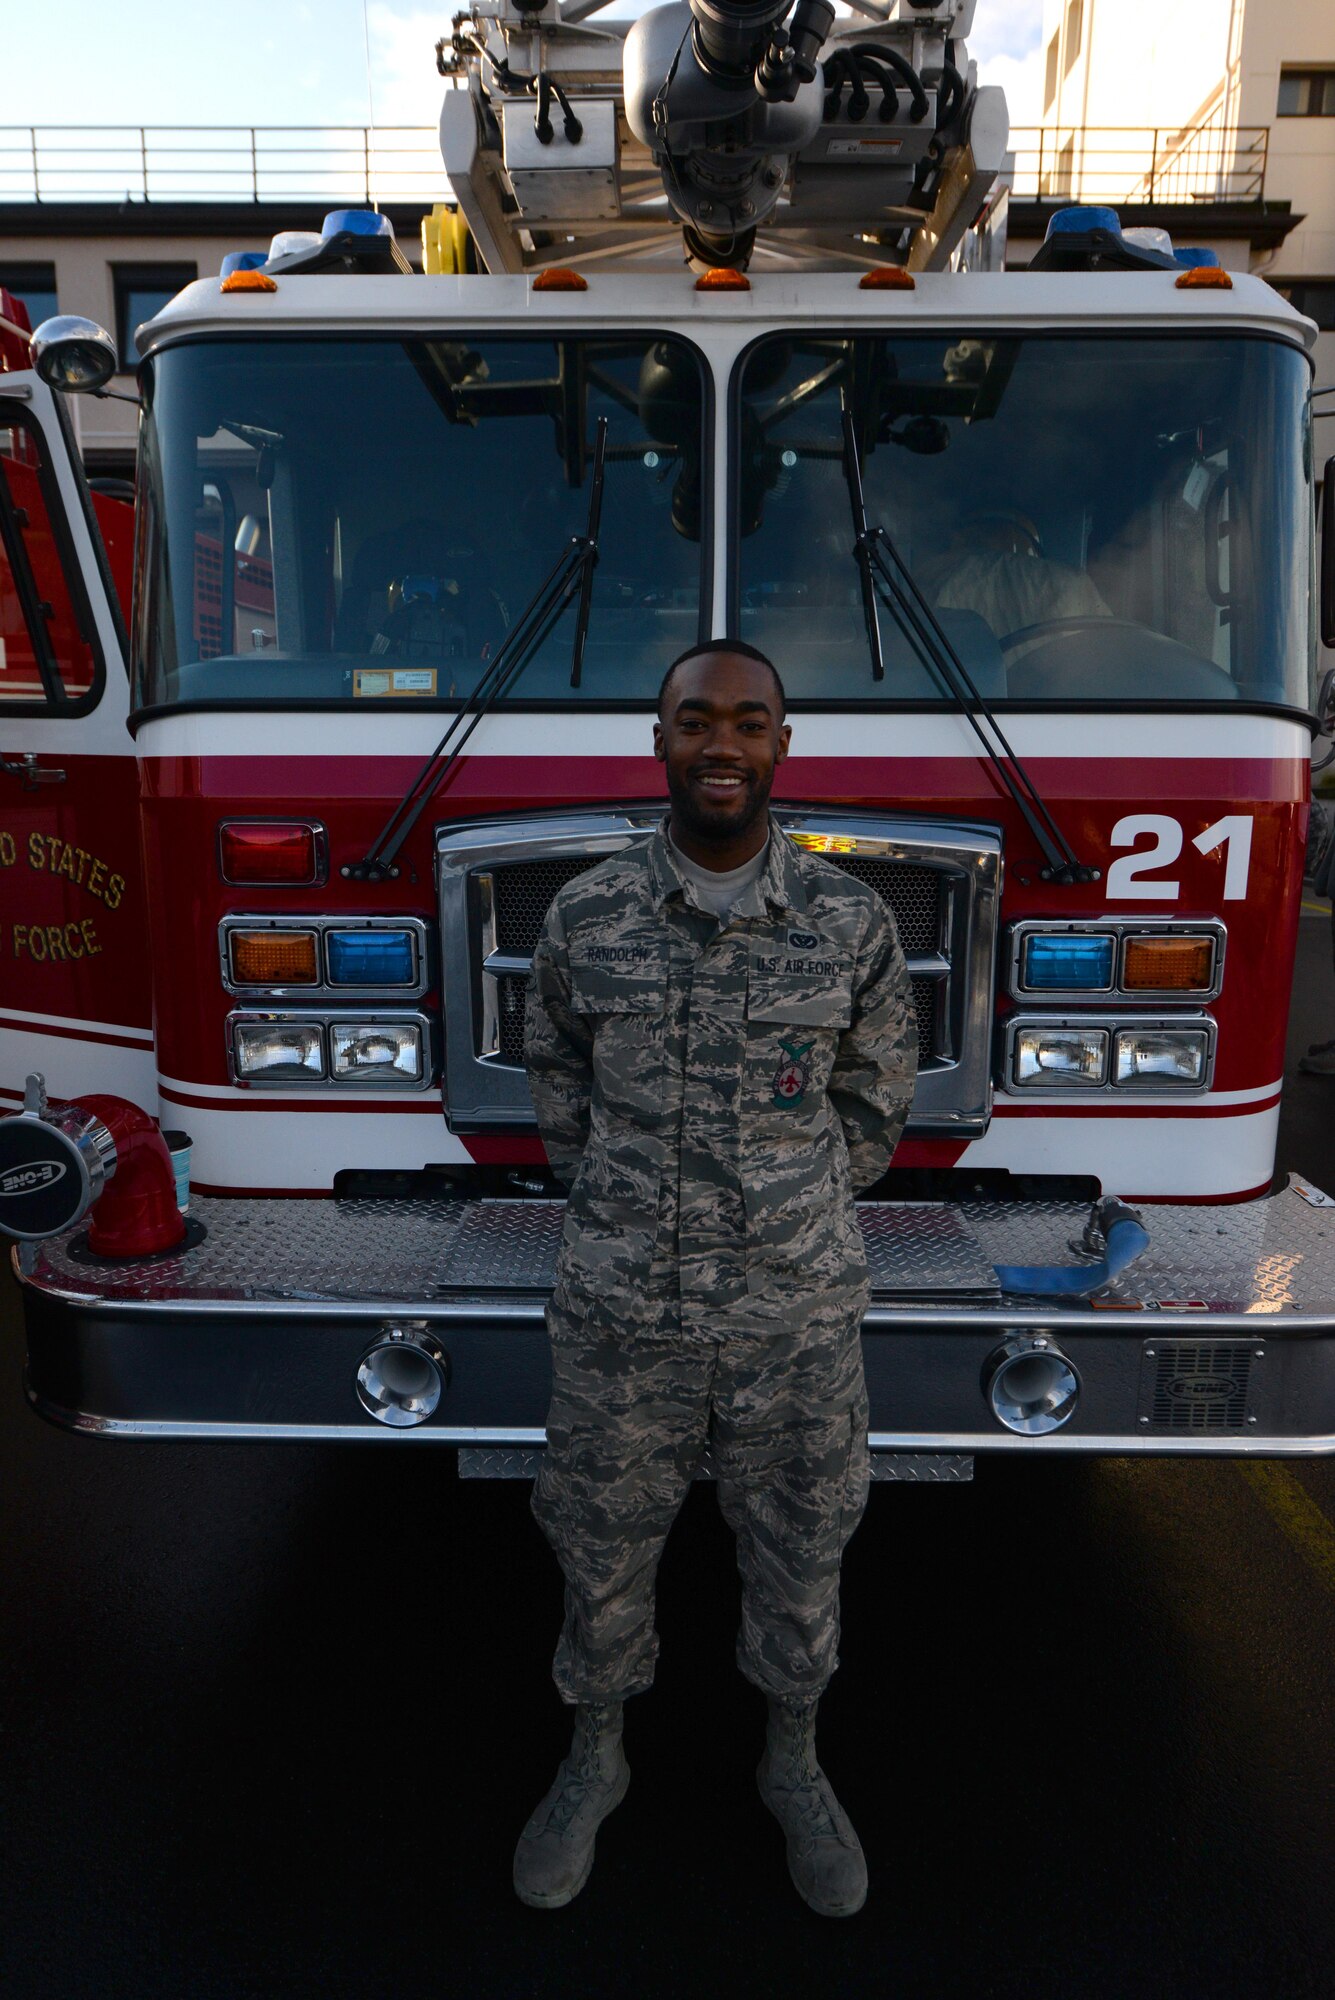 Airman Gregg Randolph, 86th Civil Engineer Squadron firefighter, poses for a photo outside Fire Station one on Ramstein Air Base, Germany, Mar. 7, 2017. A certified first responder, Randolph understood the sense of urgency required in an emergency situation he encountered on his way home one night. (U.S. Air Force photo by Airman 1st Class D. Blake Browning)